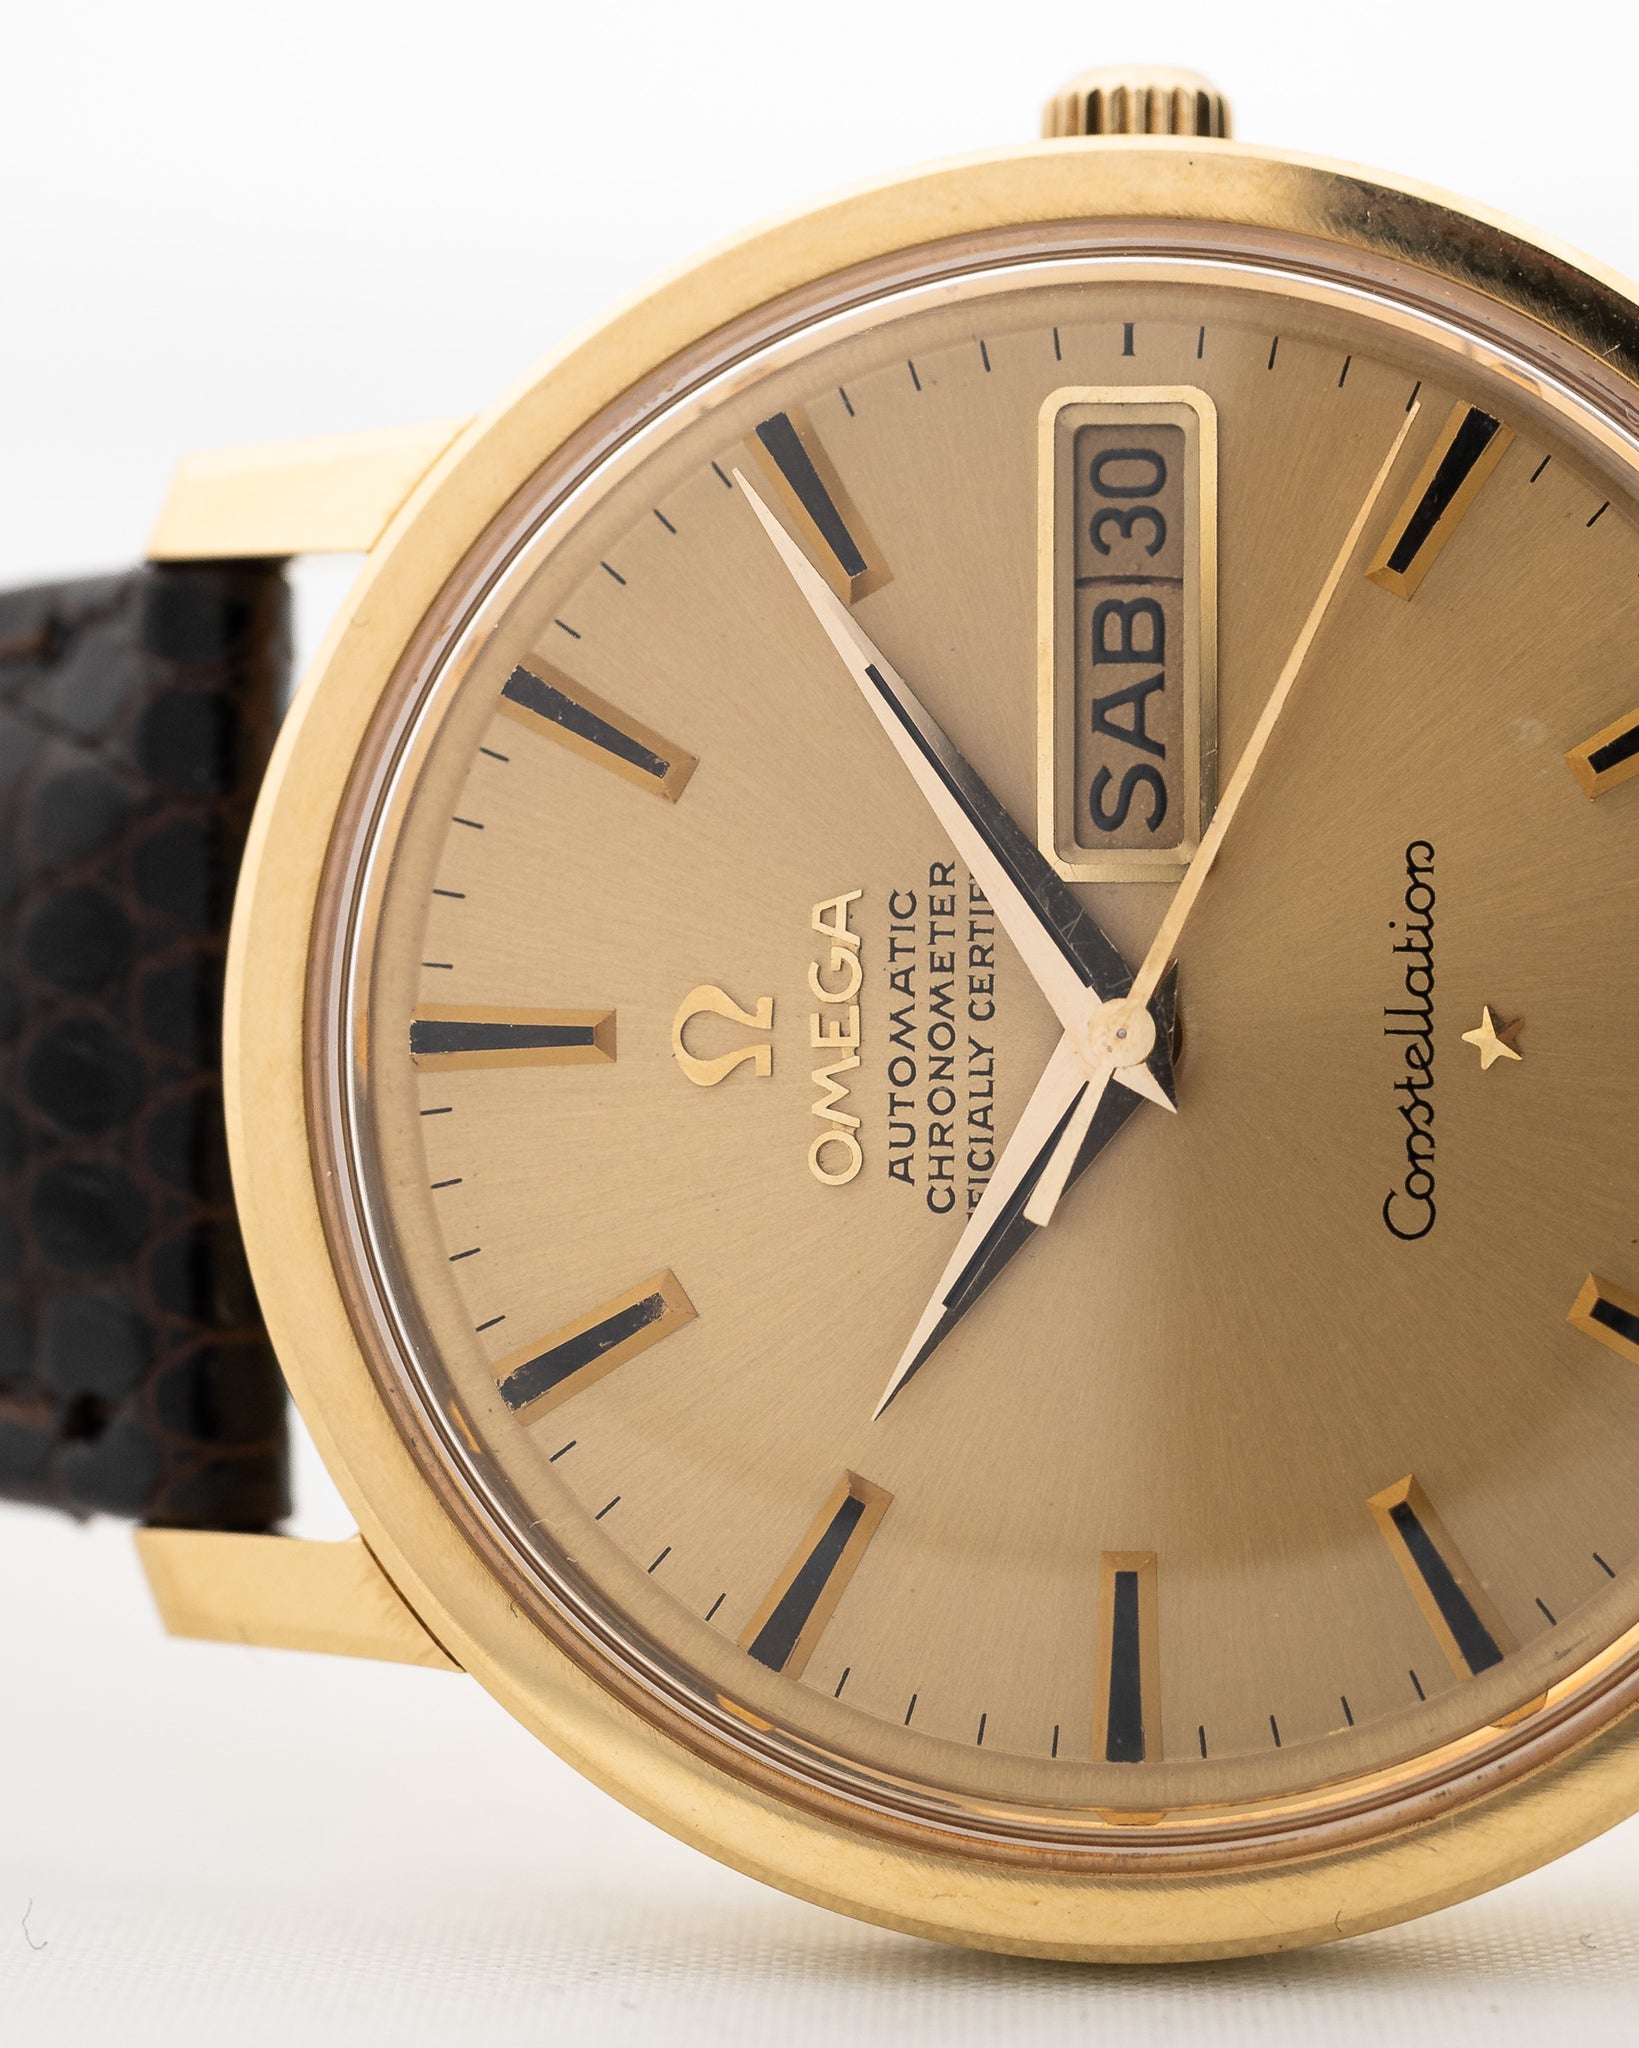 Omega Constellation 18k Day Date 1968